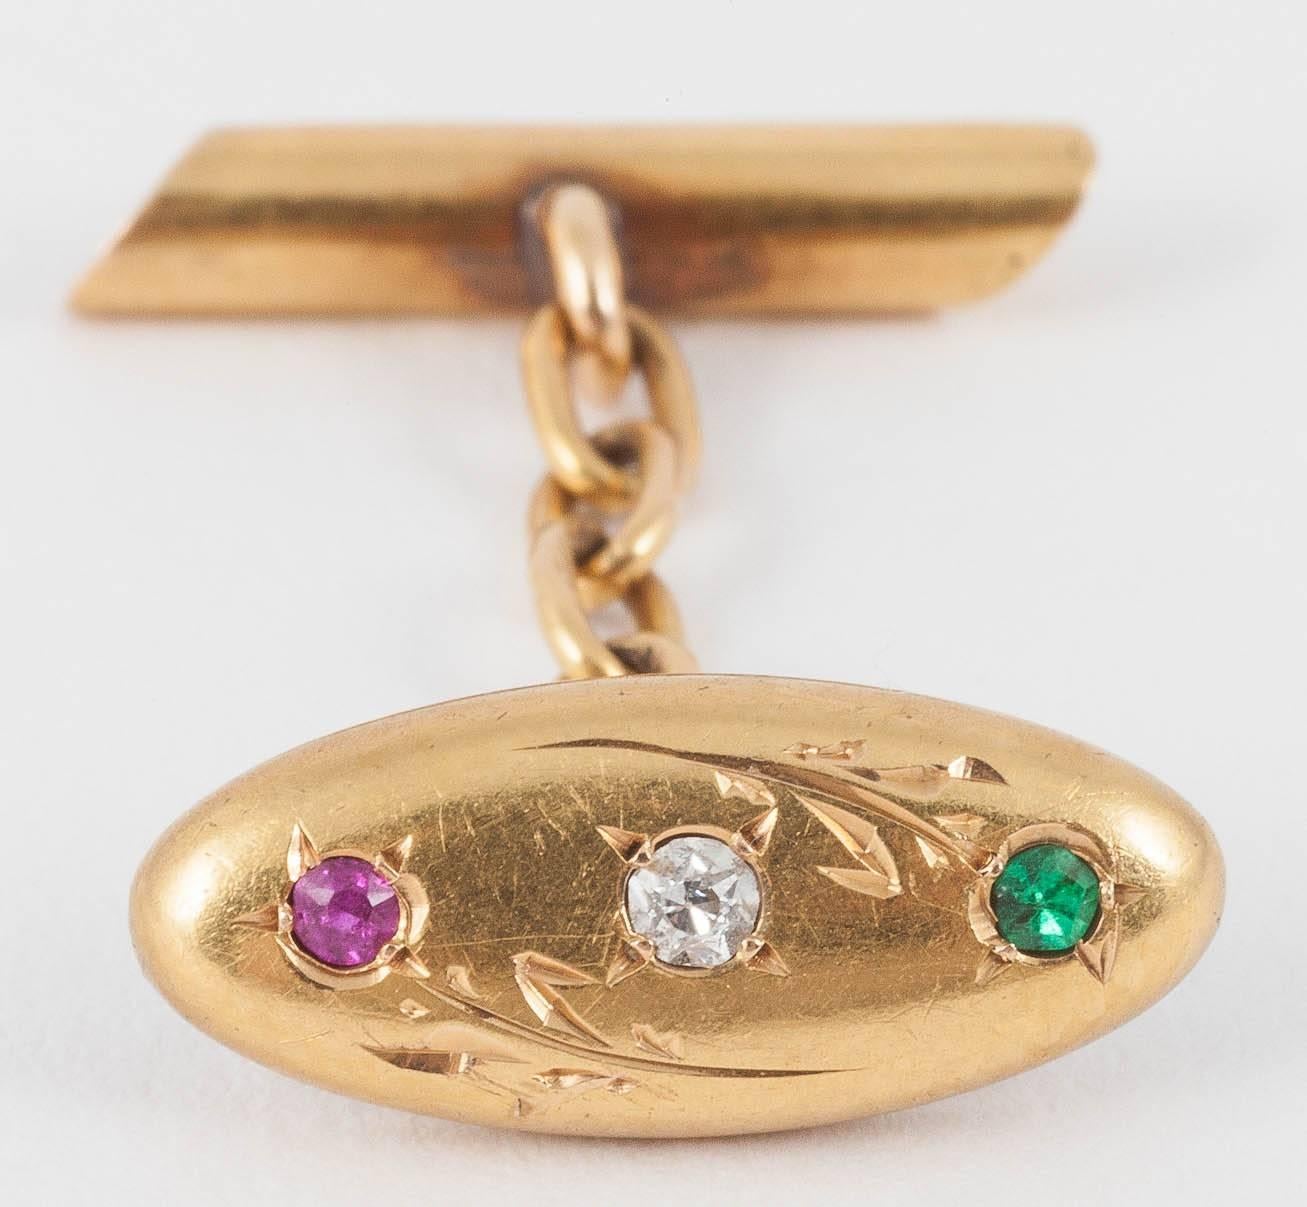 An attractive pair of french,18kt yellow gold cufflinks with engraved floral design,and set with an emerald,old cut brilliant diamond,and a burma ruby.Original baton connections.c,1910